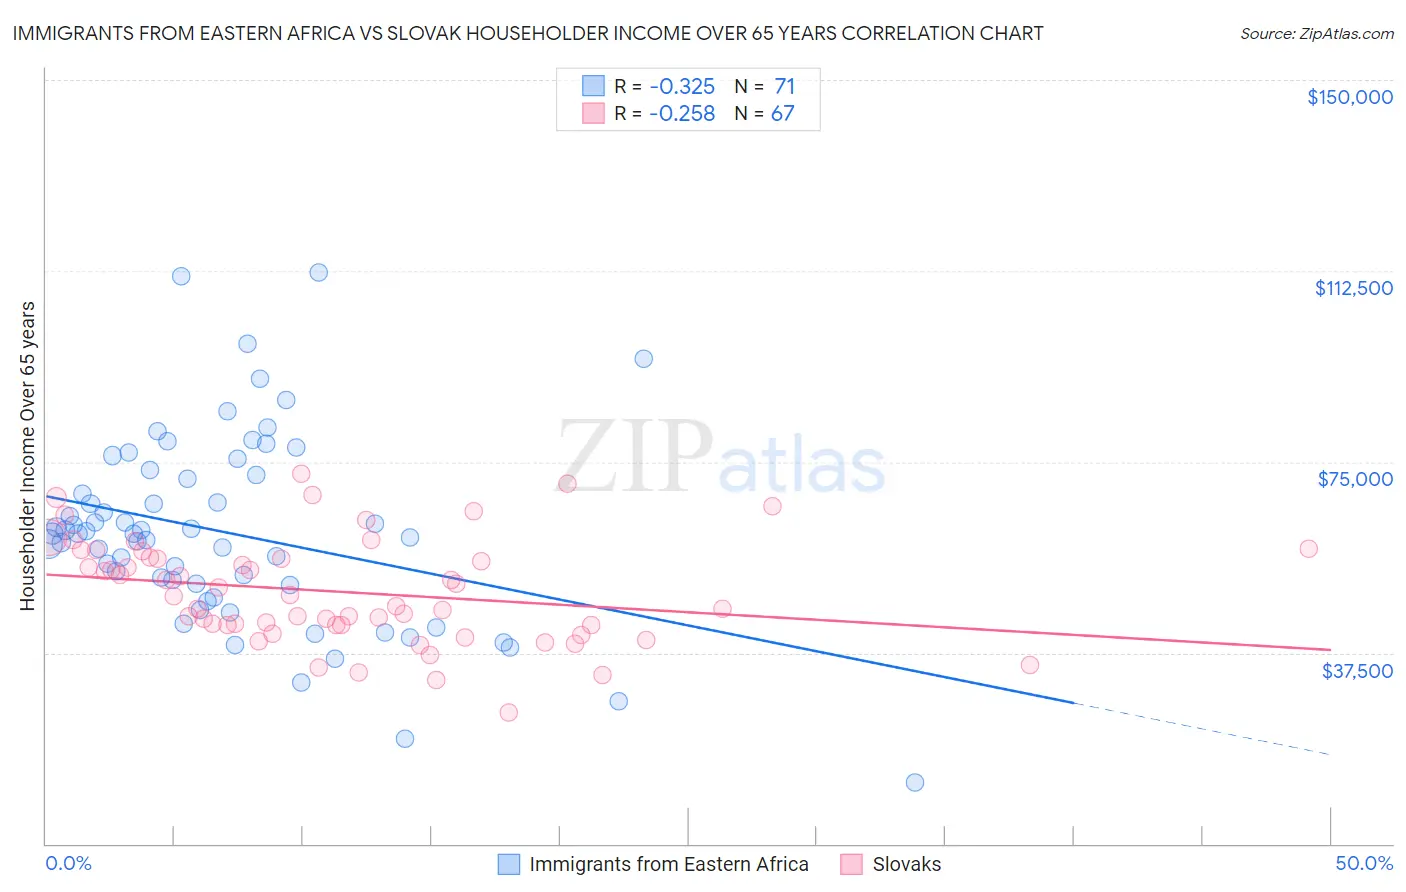 Immigrants from Eastern Africa vs Slovak Householder Income Over 65 years